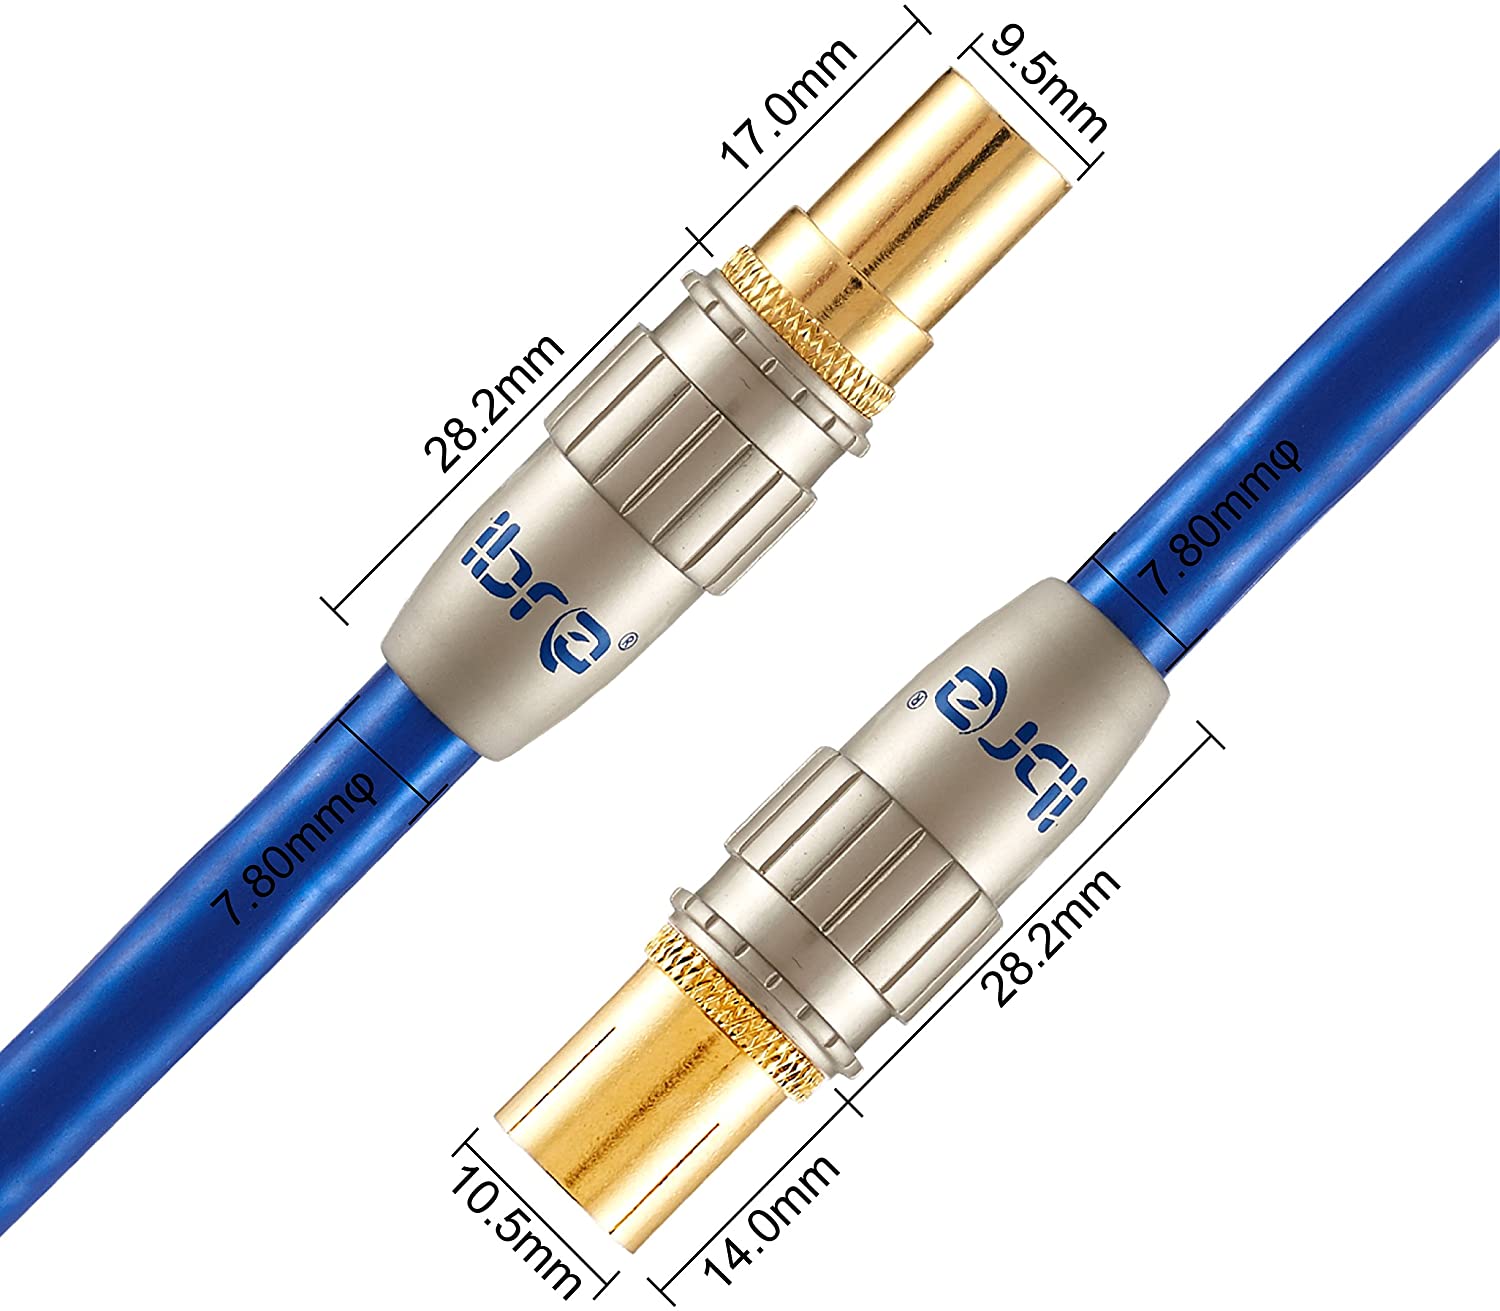 Pure OFC RF RG6 TV Aerial Coax Lead Gold Male to Female Extension Premium Cable - 15m IBRA Blue Gold Series